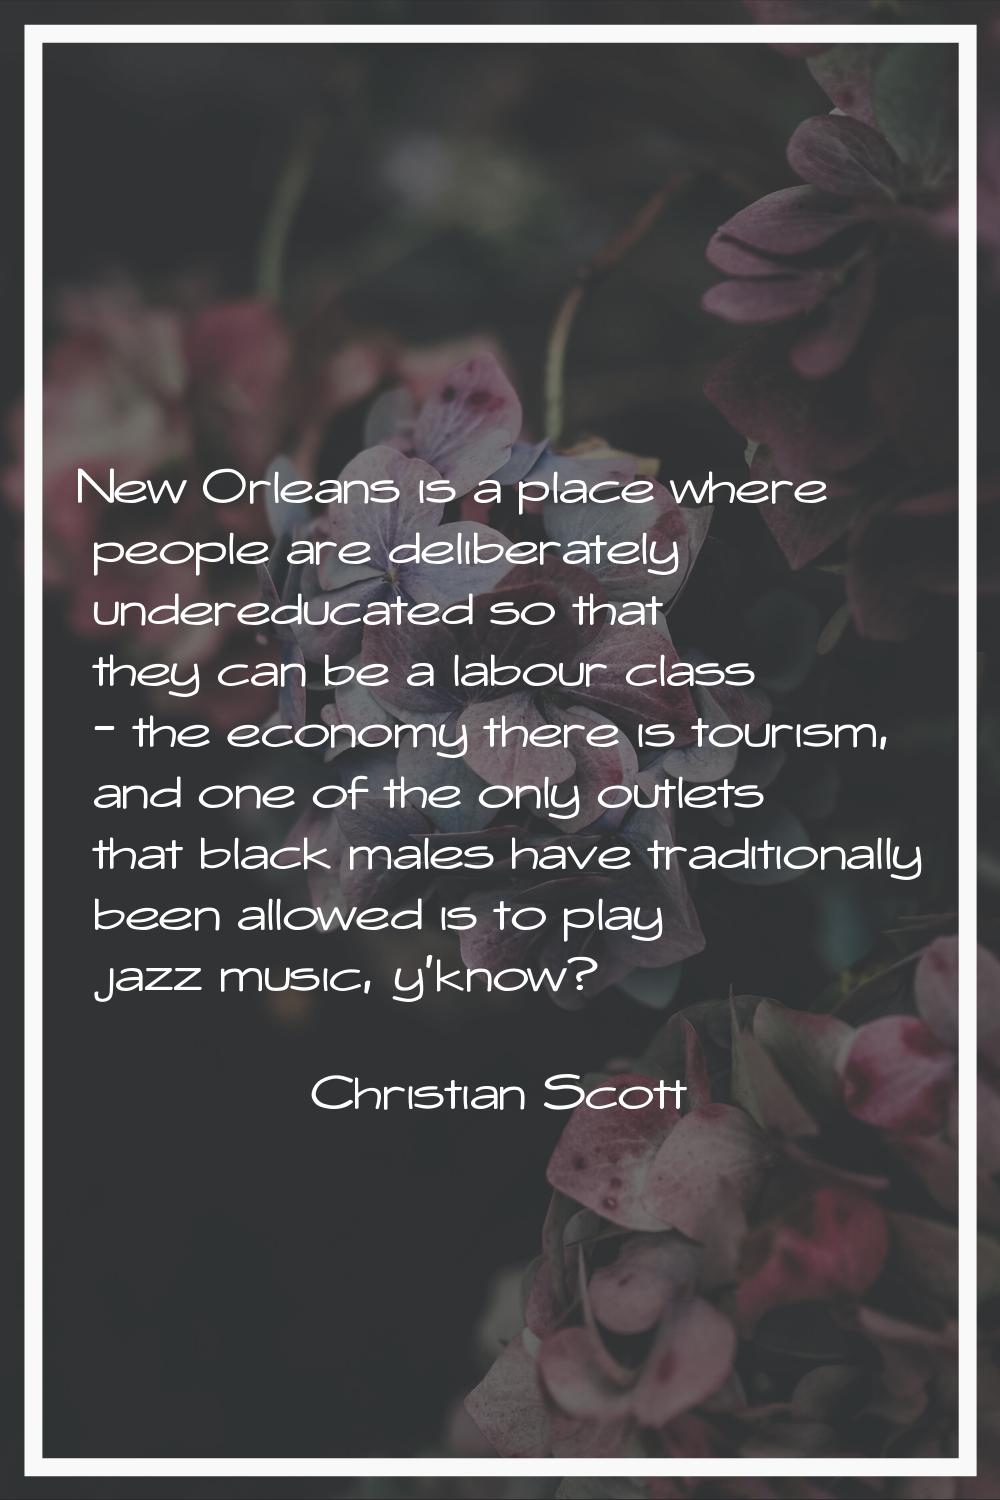 New Orleans is a place where people are deliberately undereducated so that they can be a labour cla